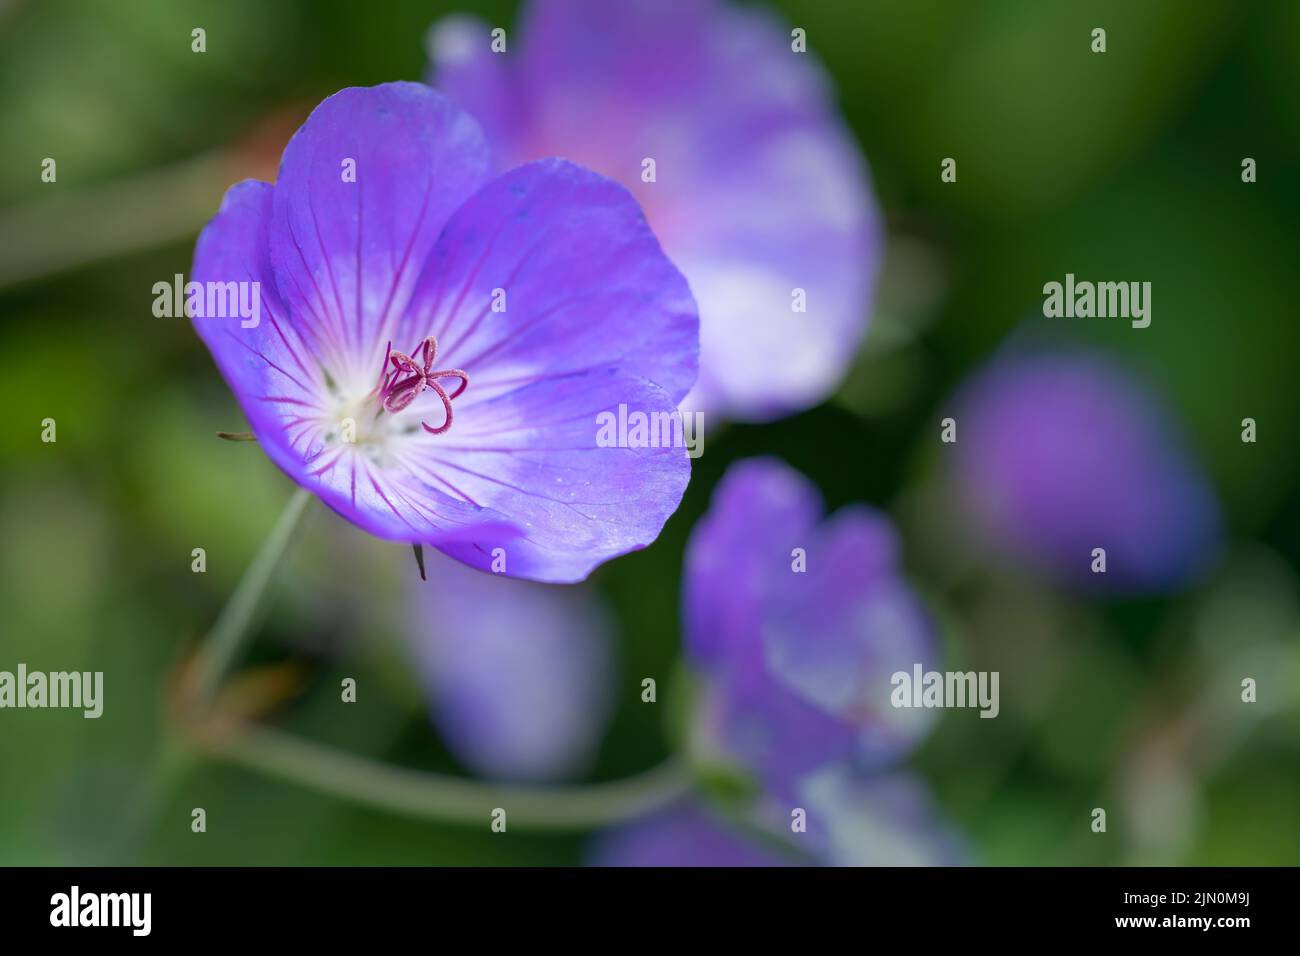 Blue Geranium (Geranium rozanne) is closely related to the Meadow Cranesbill (Geranium pratense) and is often grown as a perennial in gardens. Stock Photo